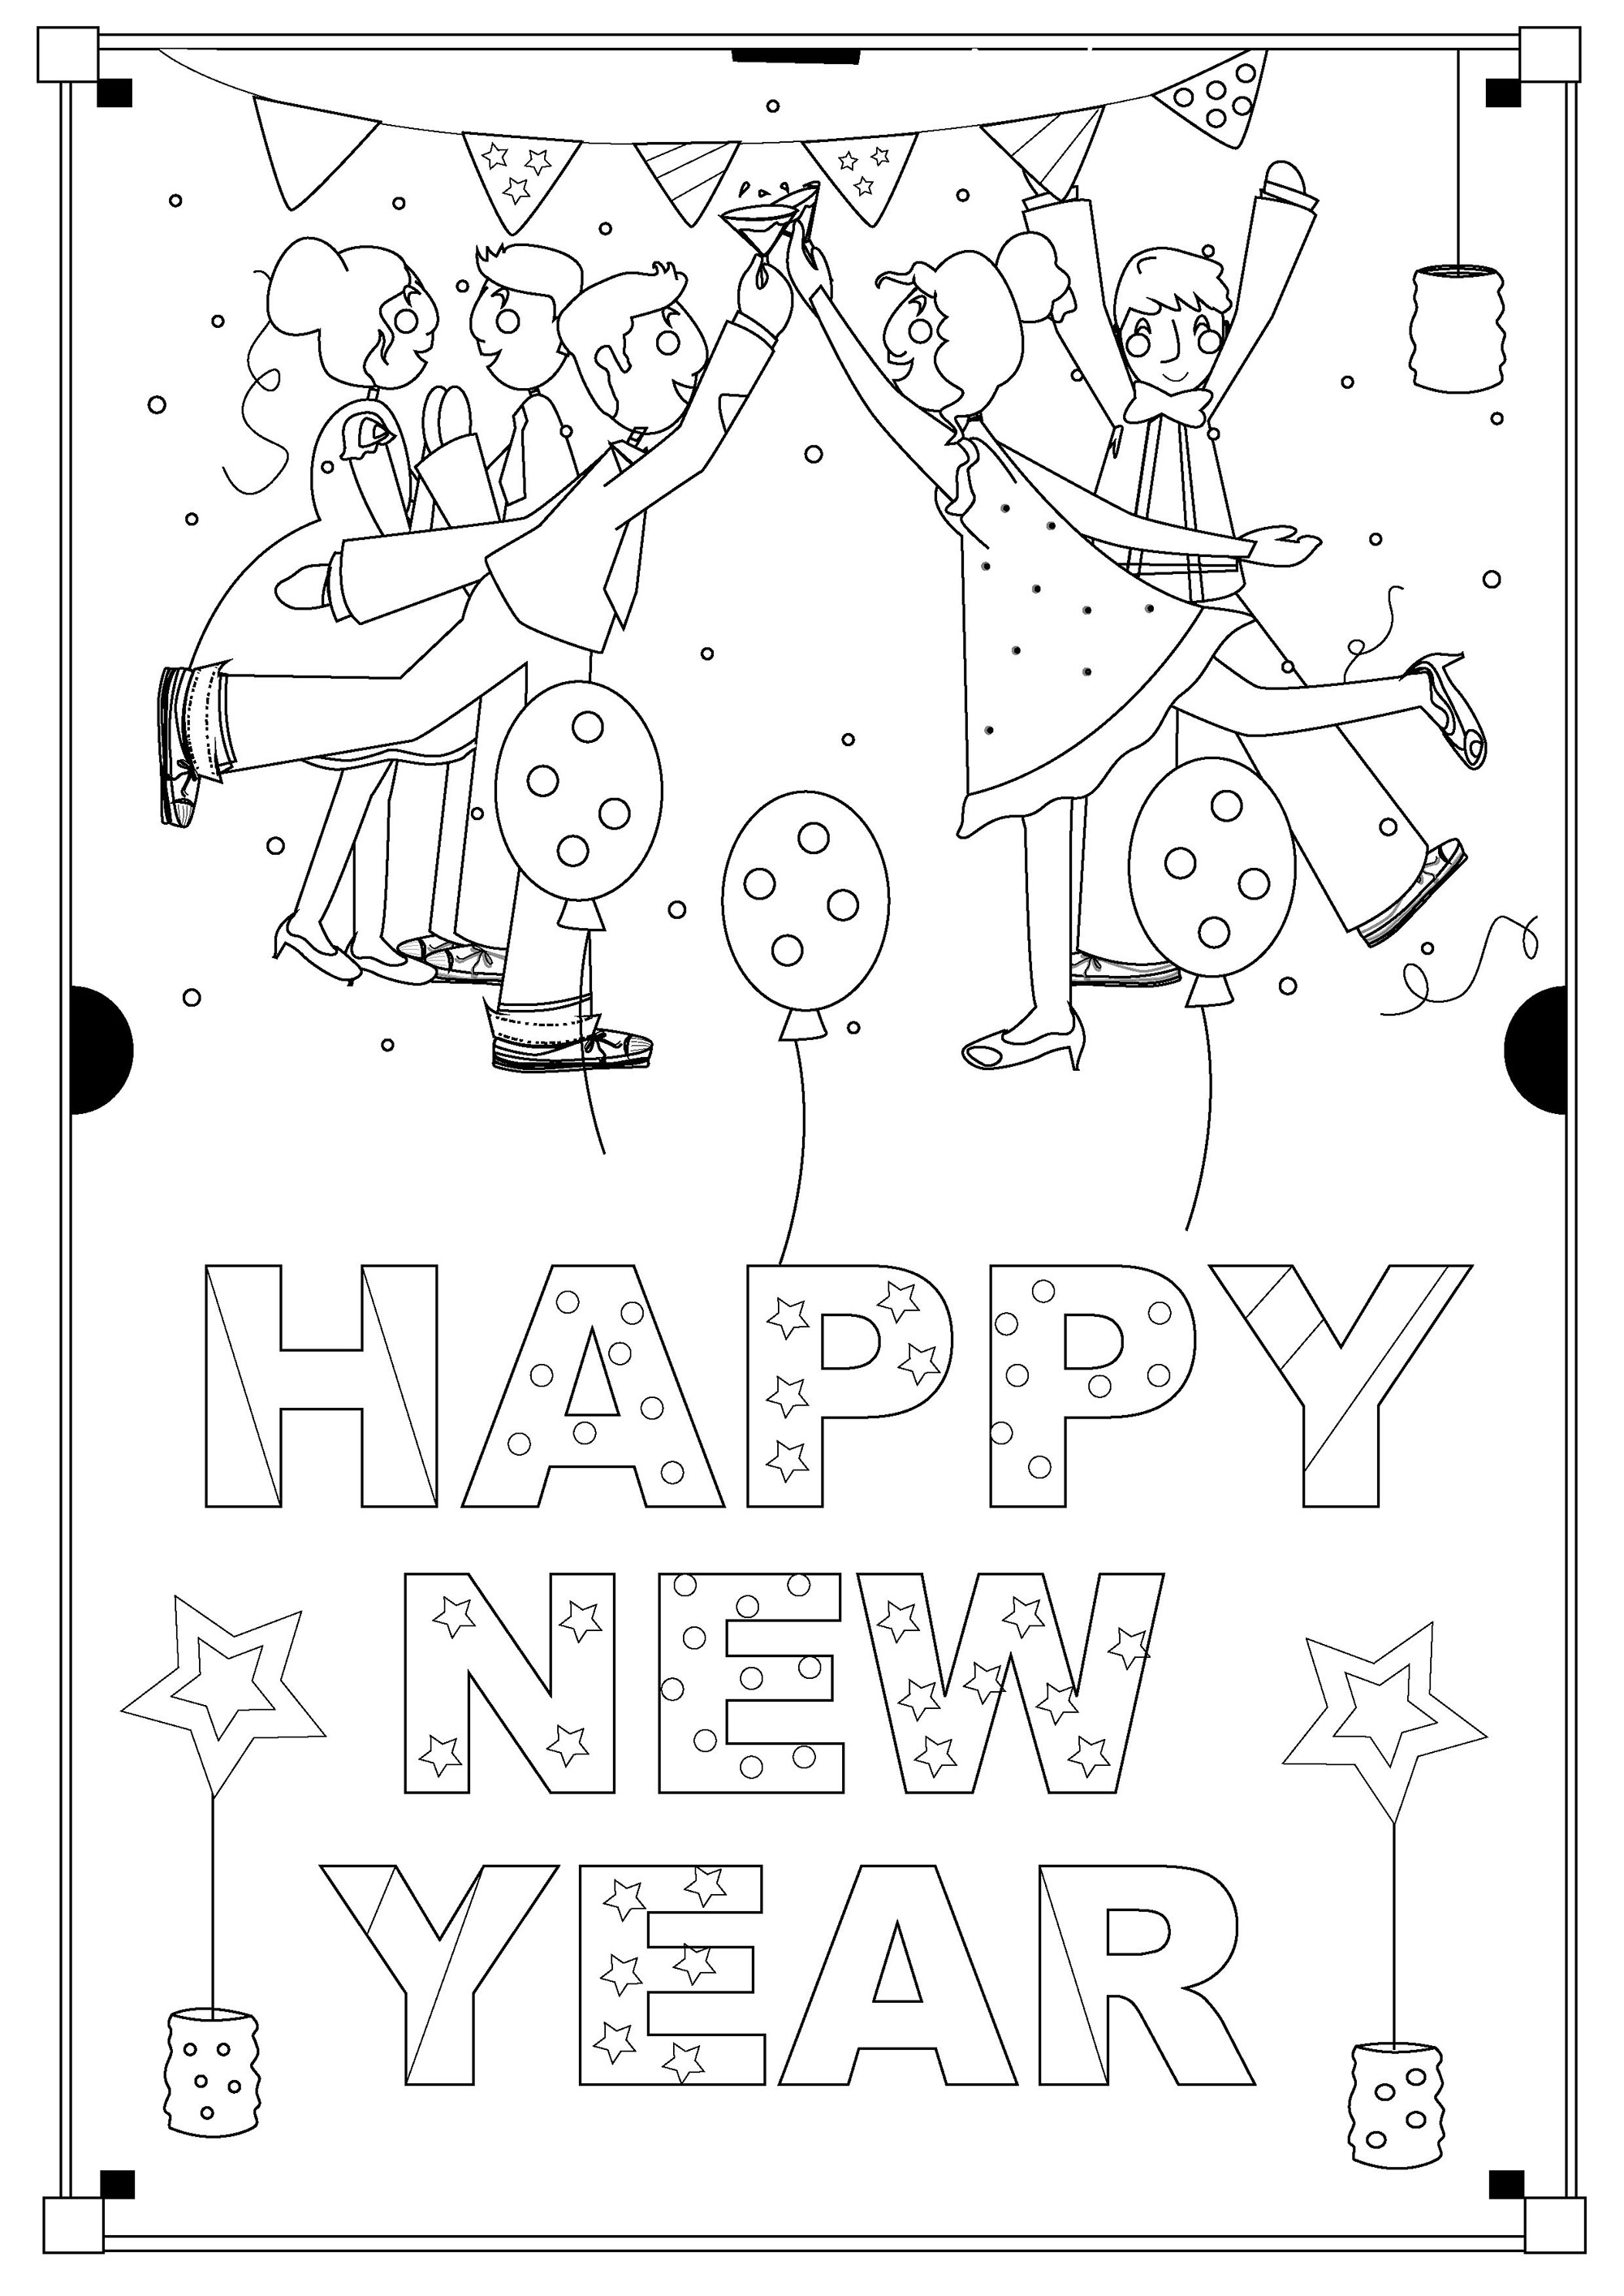 New Year's Eve party, Artist : Gaelle Picard